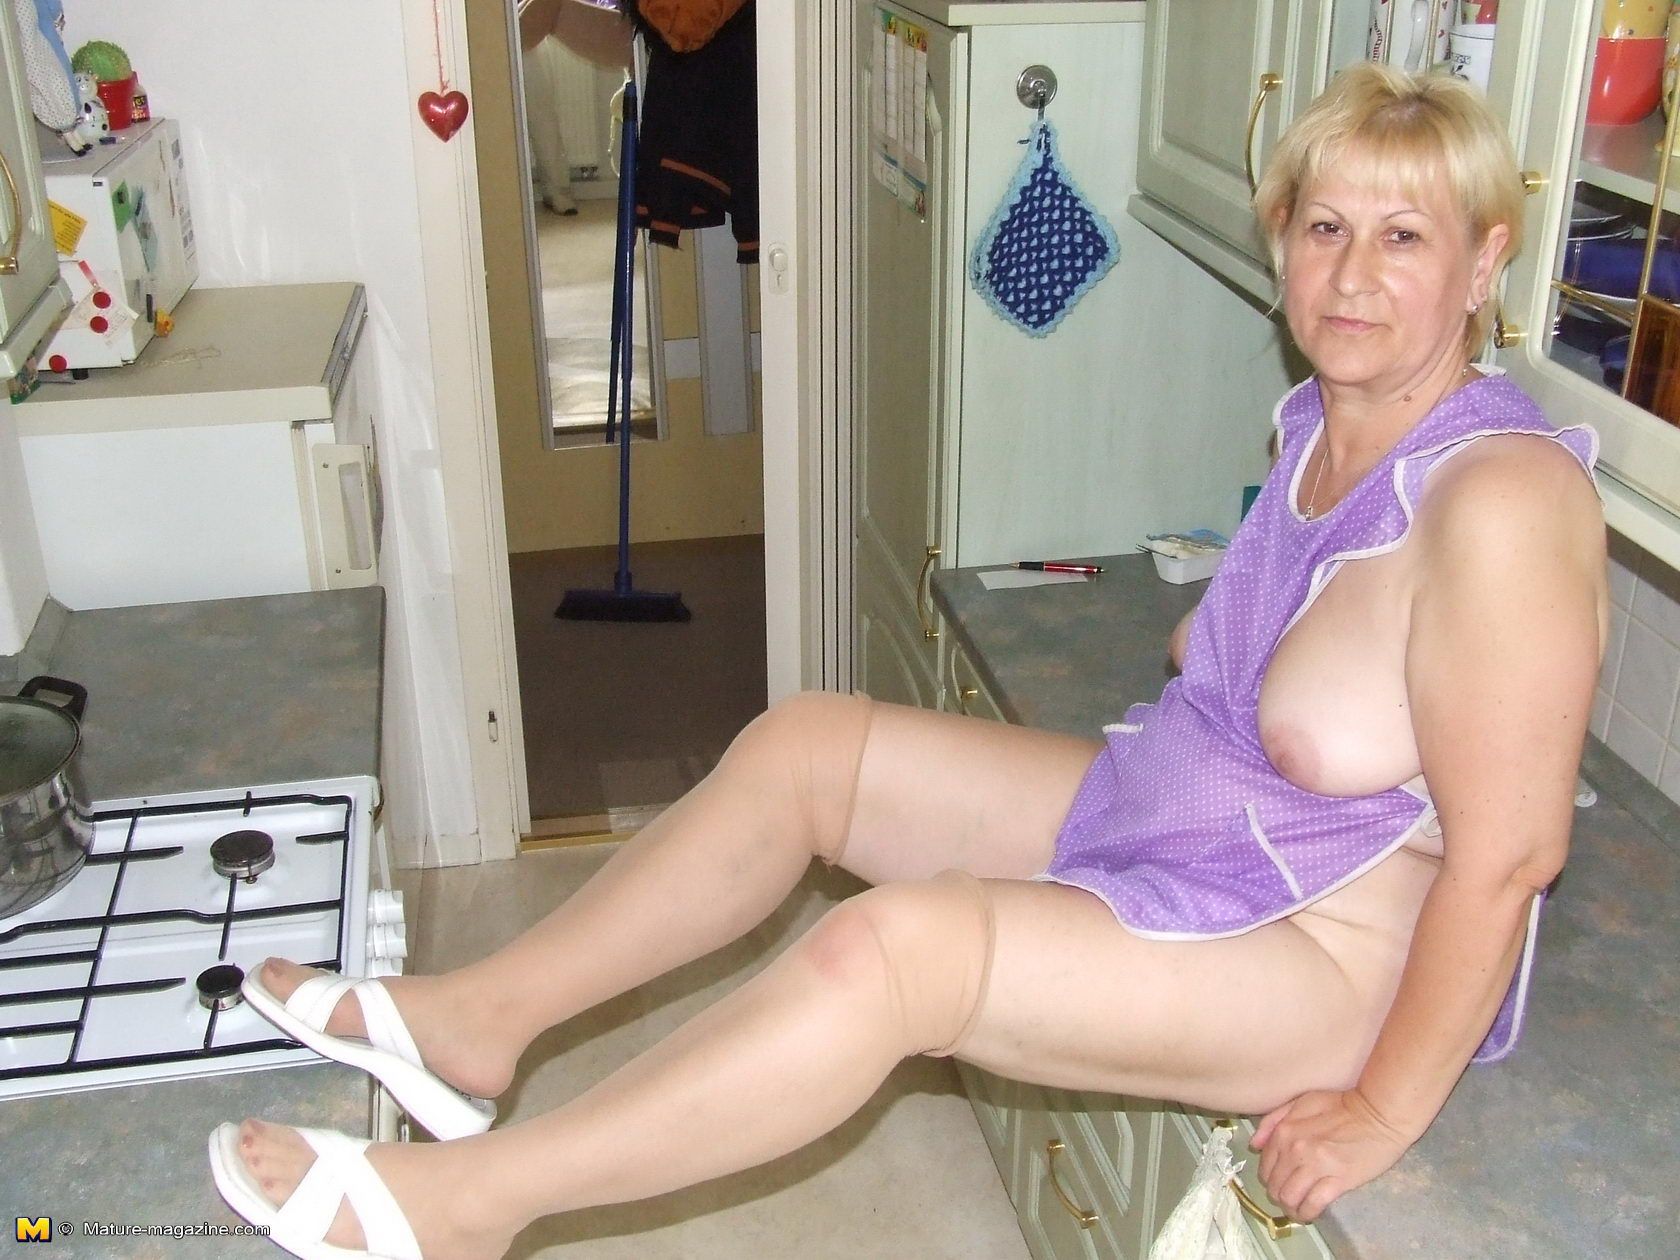 Real amateur mature housewifes nide pics pic